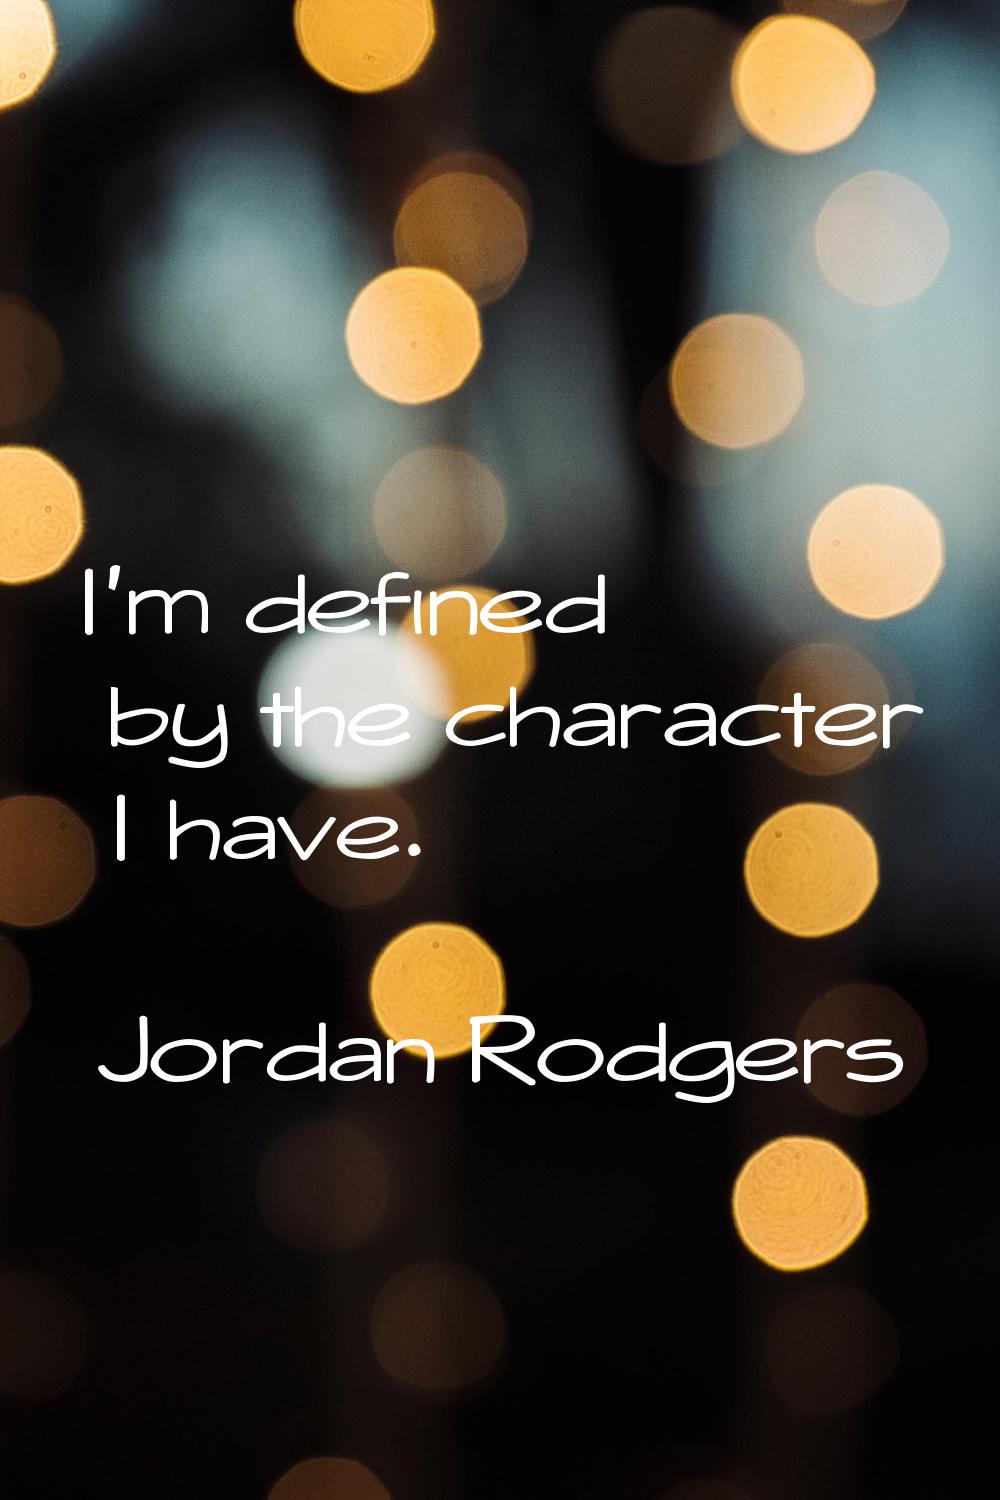 I'm defined by the character I have.